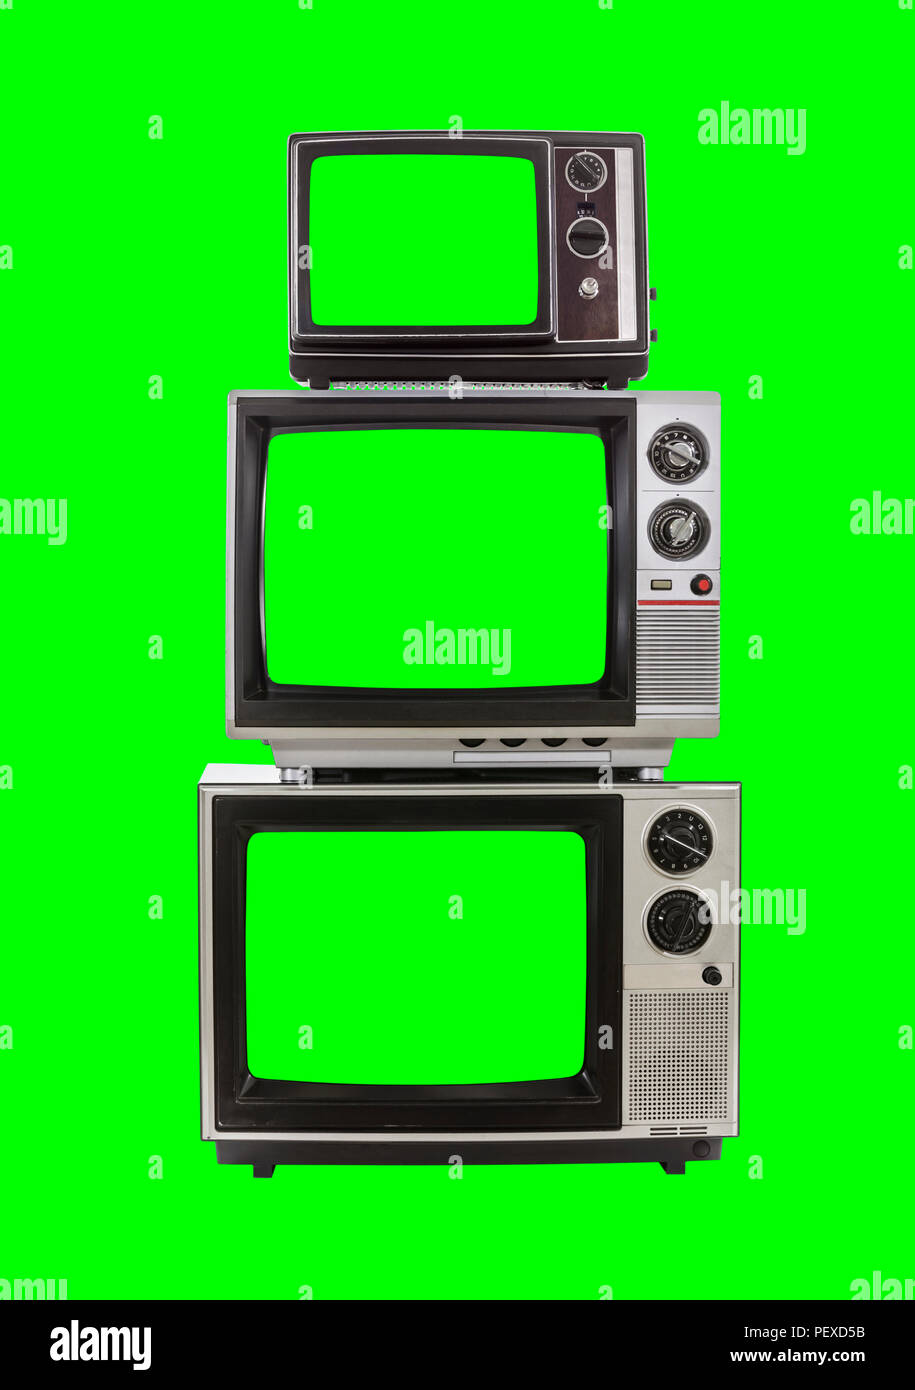 Vintage television tower isolated with chroma green background and screens. Stock Photo